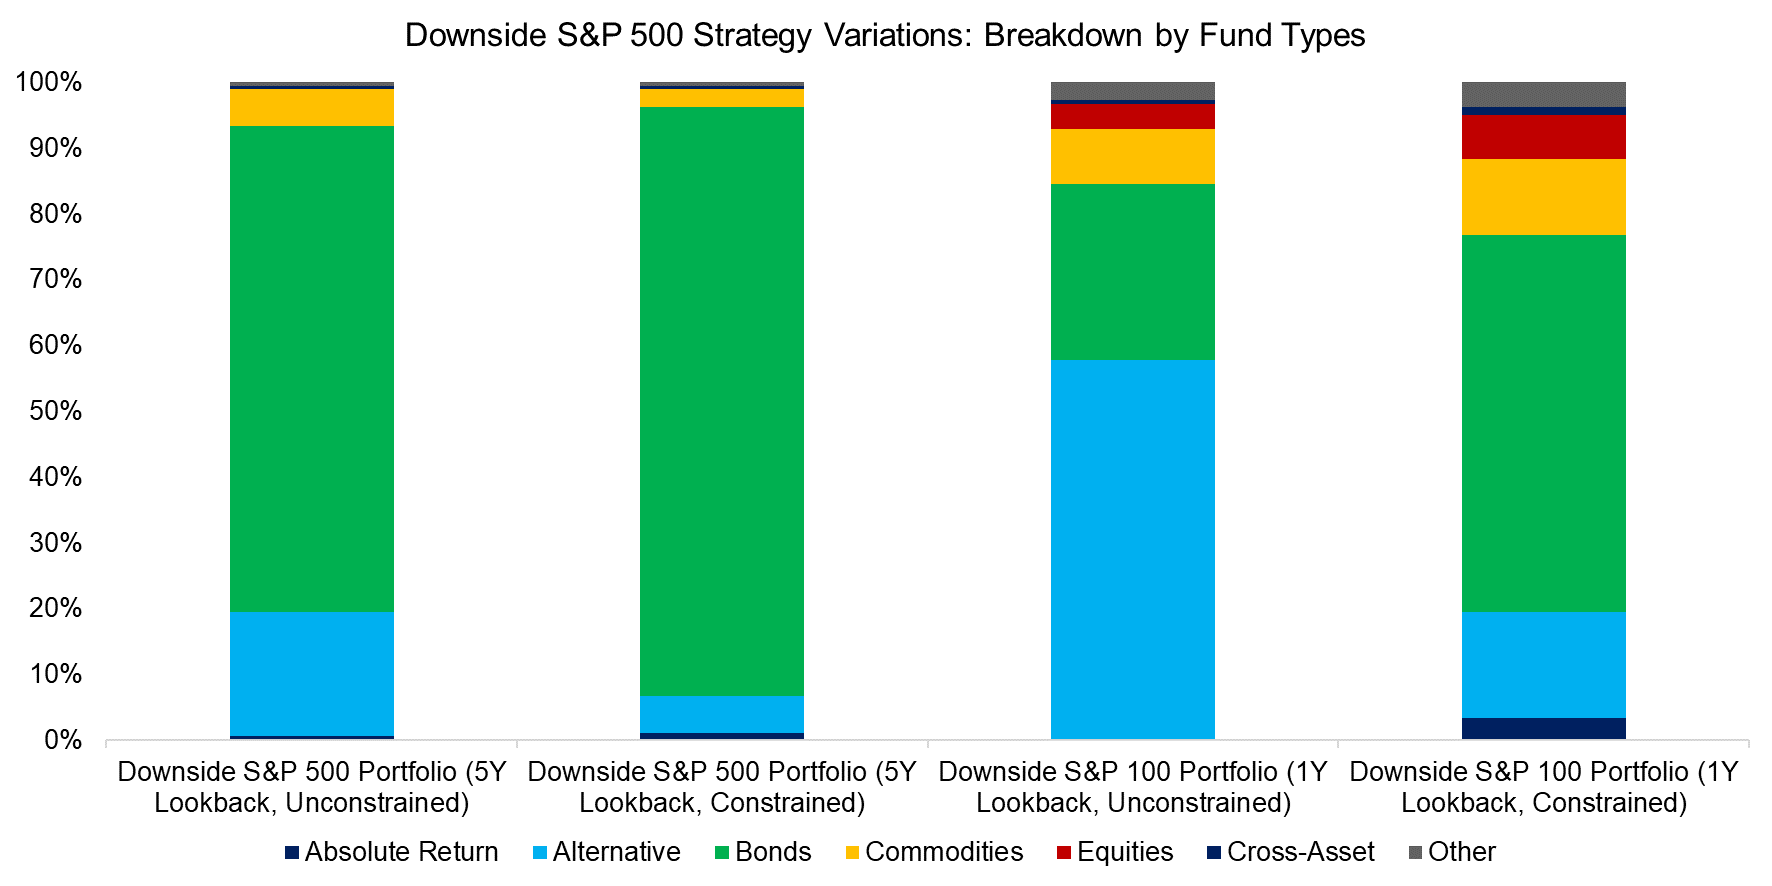 Downside S&P 500 Strategy Variations Breakdown by Fund Types